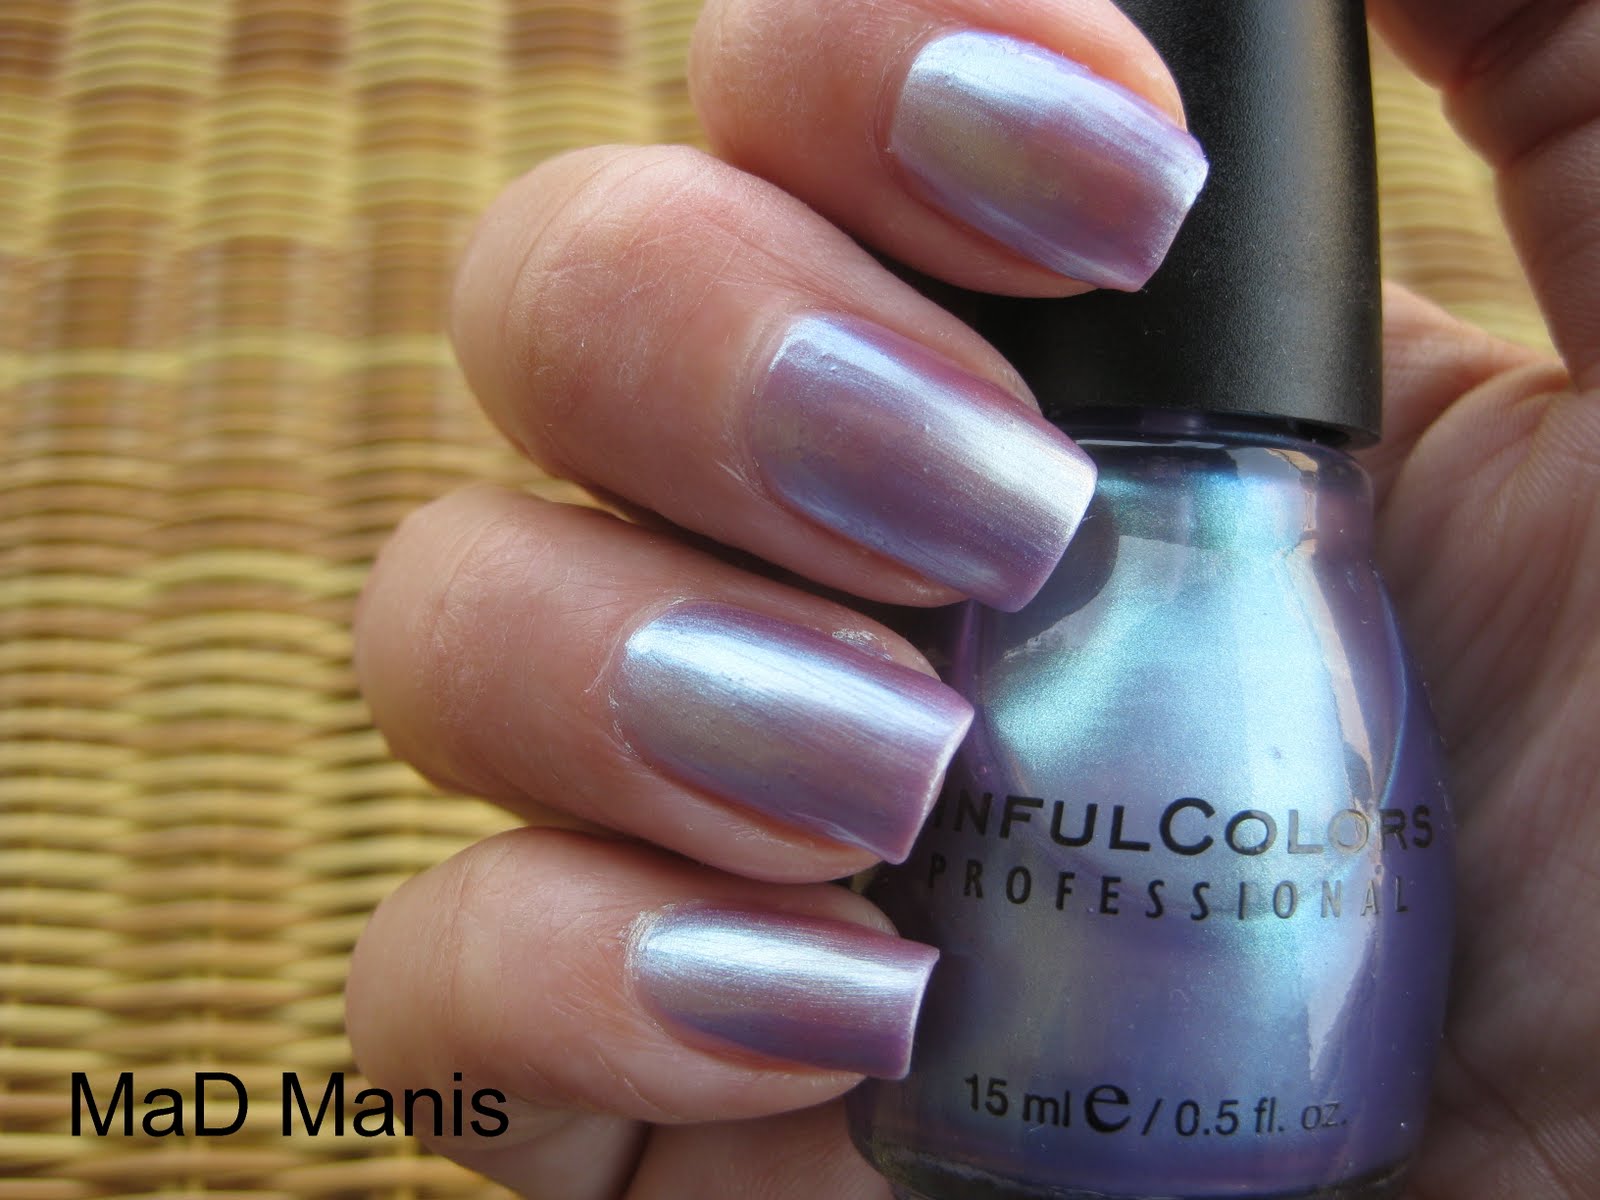 9. Let Me Go Sinful Colors Nail Varnish - wide 9